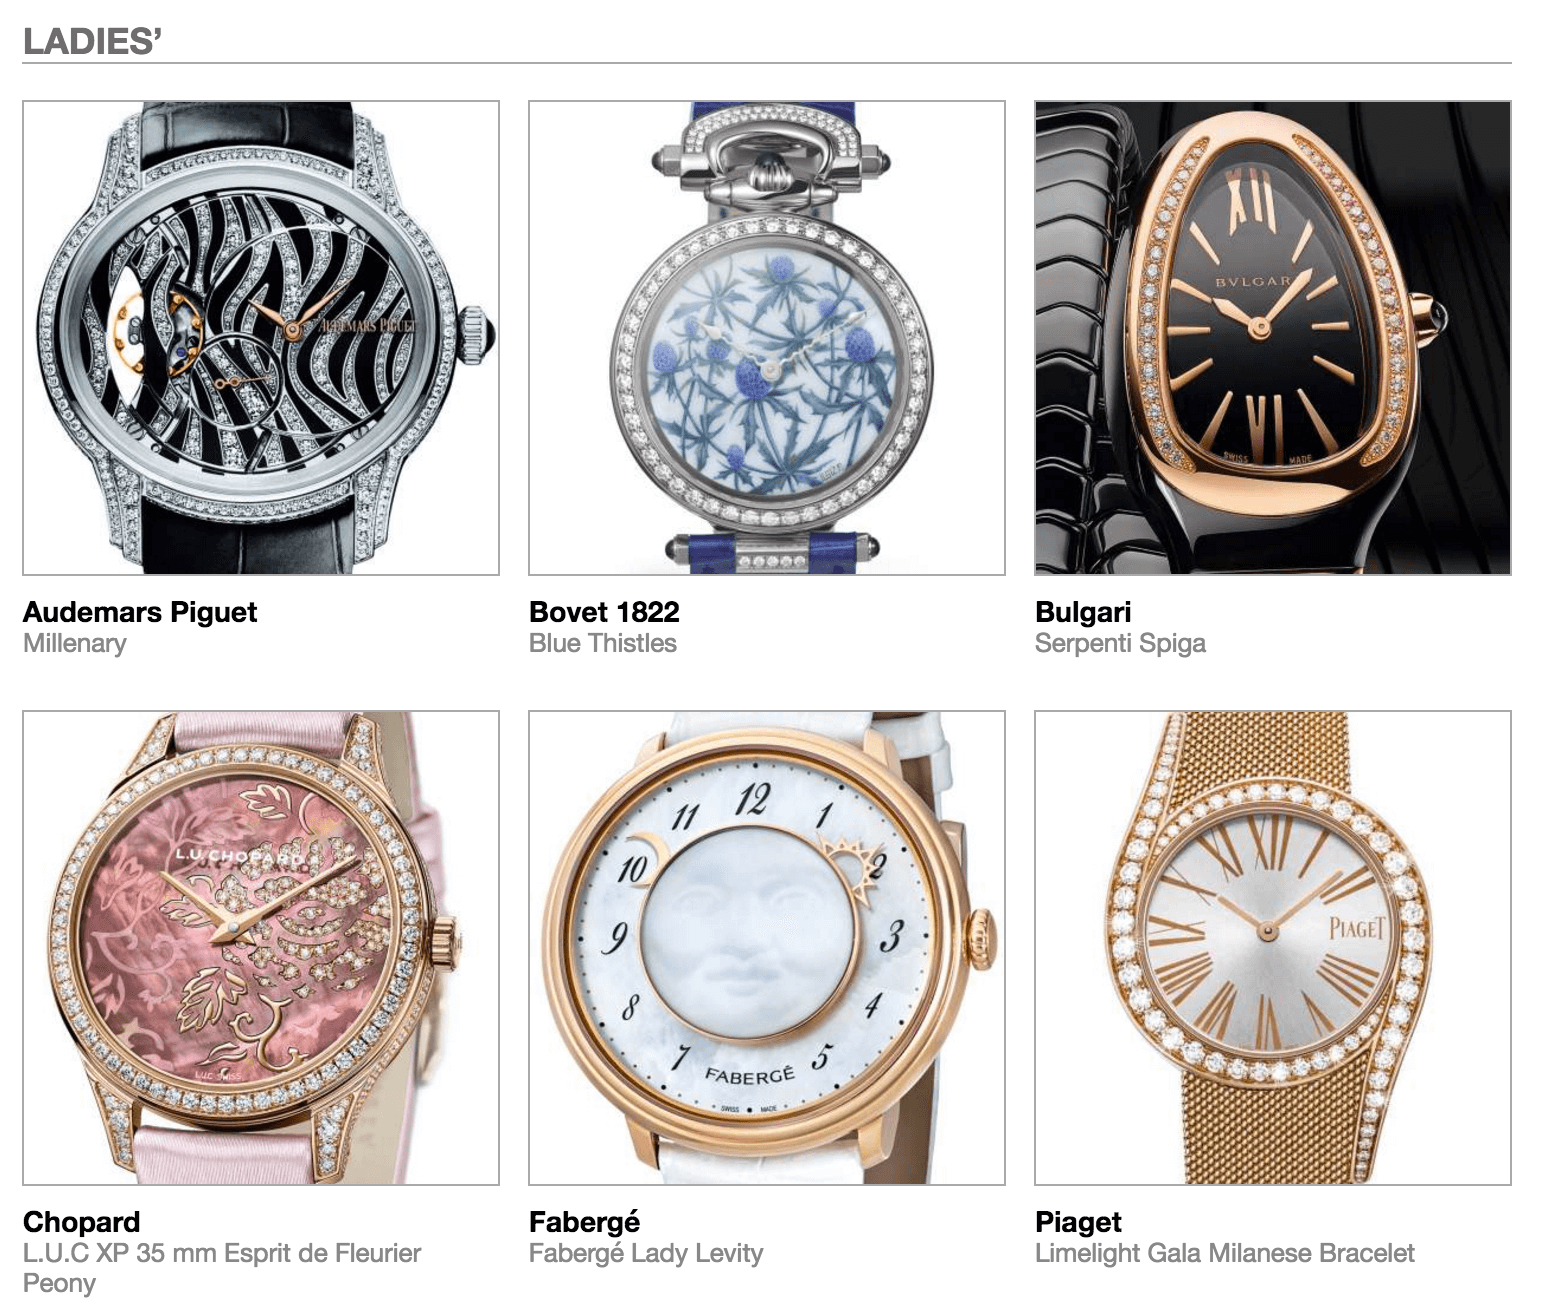 Pre-selected Ladies' watches in the 2016 GPHG